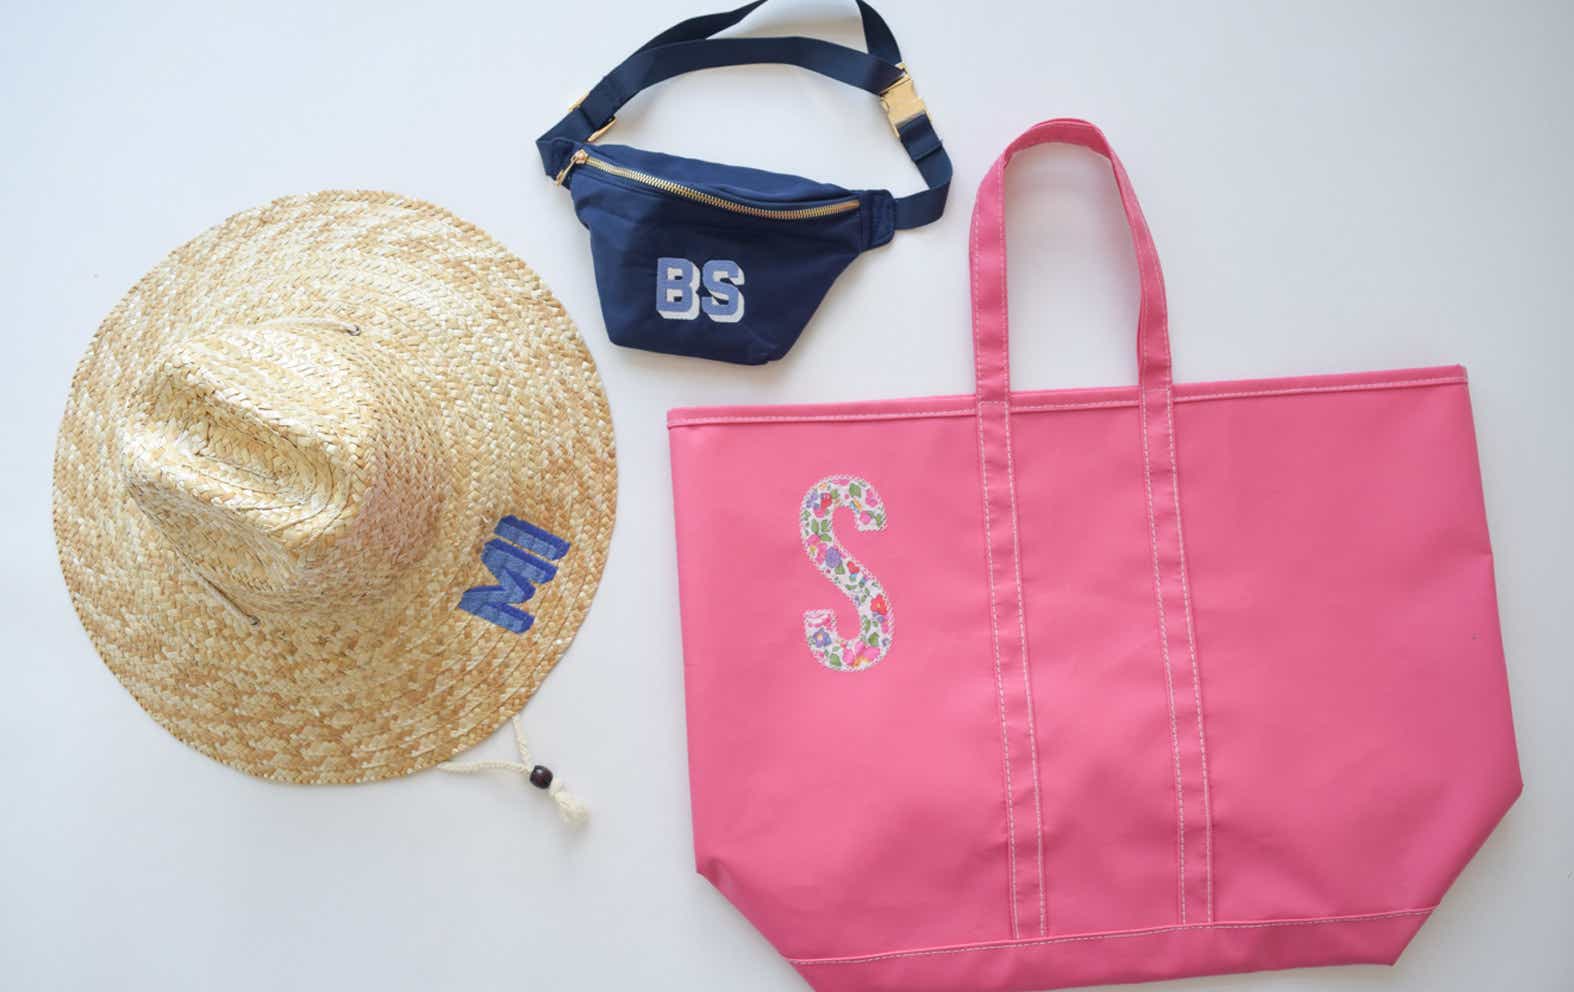 monogrammed straw hat, fanny pack, and tote bag